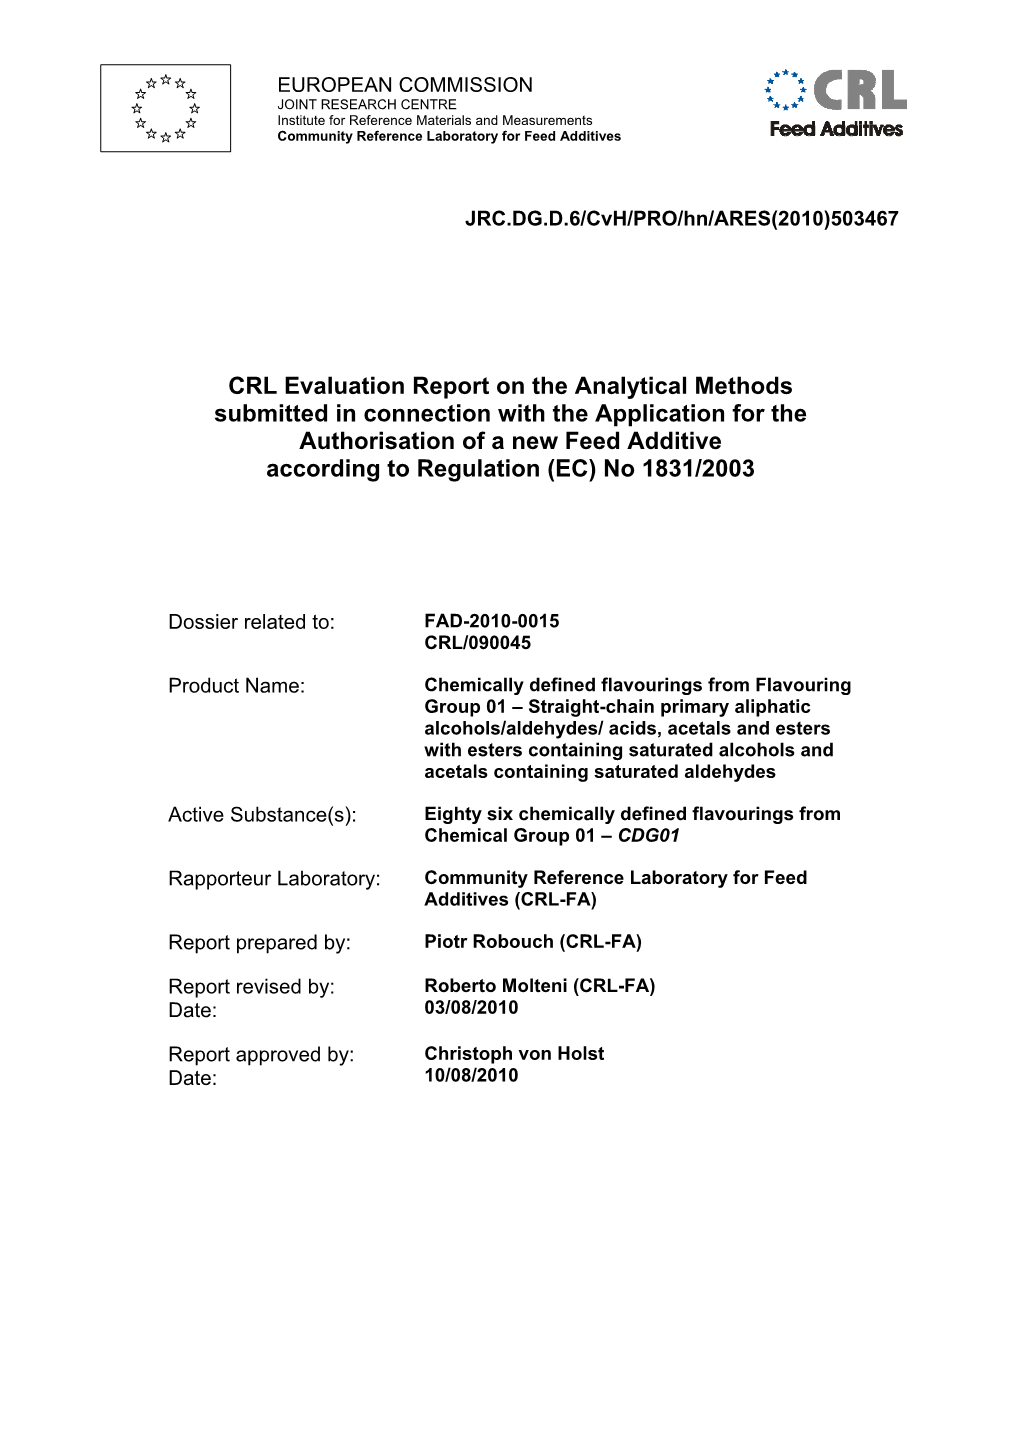 CRL Evaluation Report on the Analytical Methods Submitted In